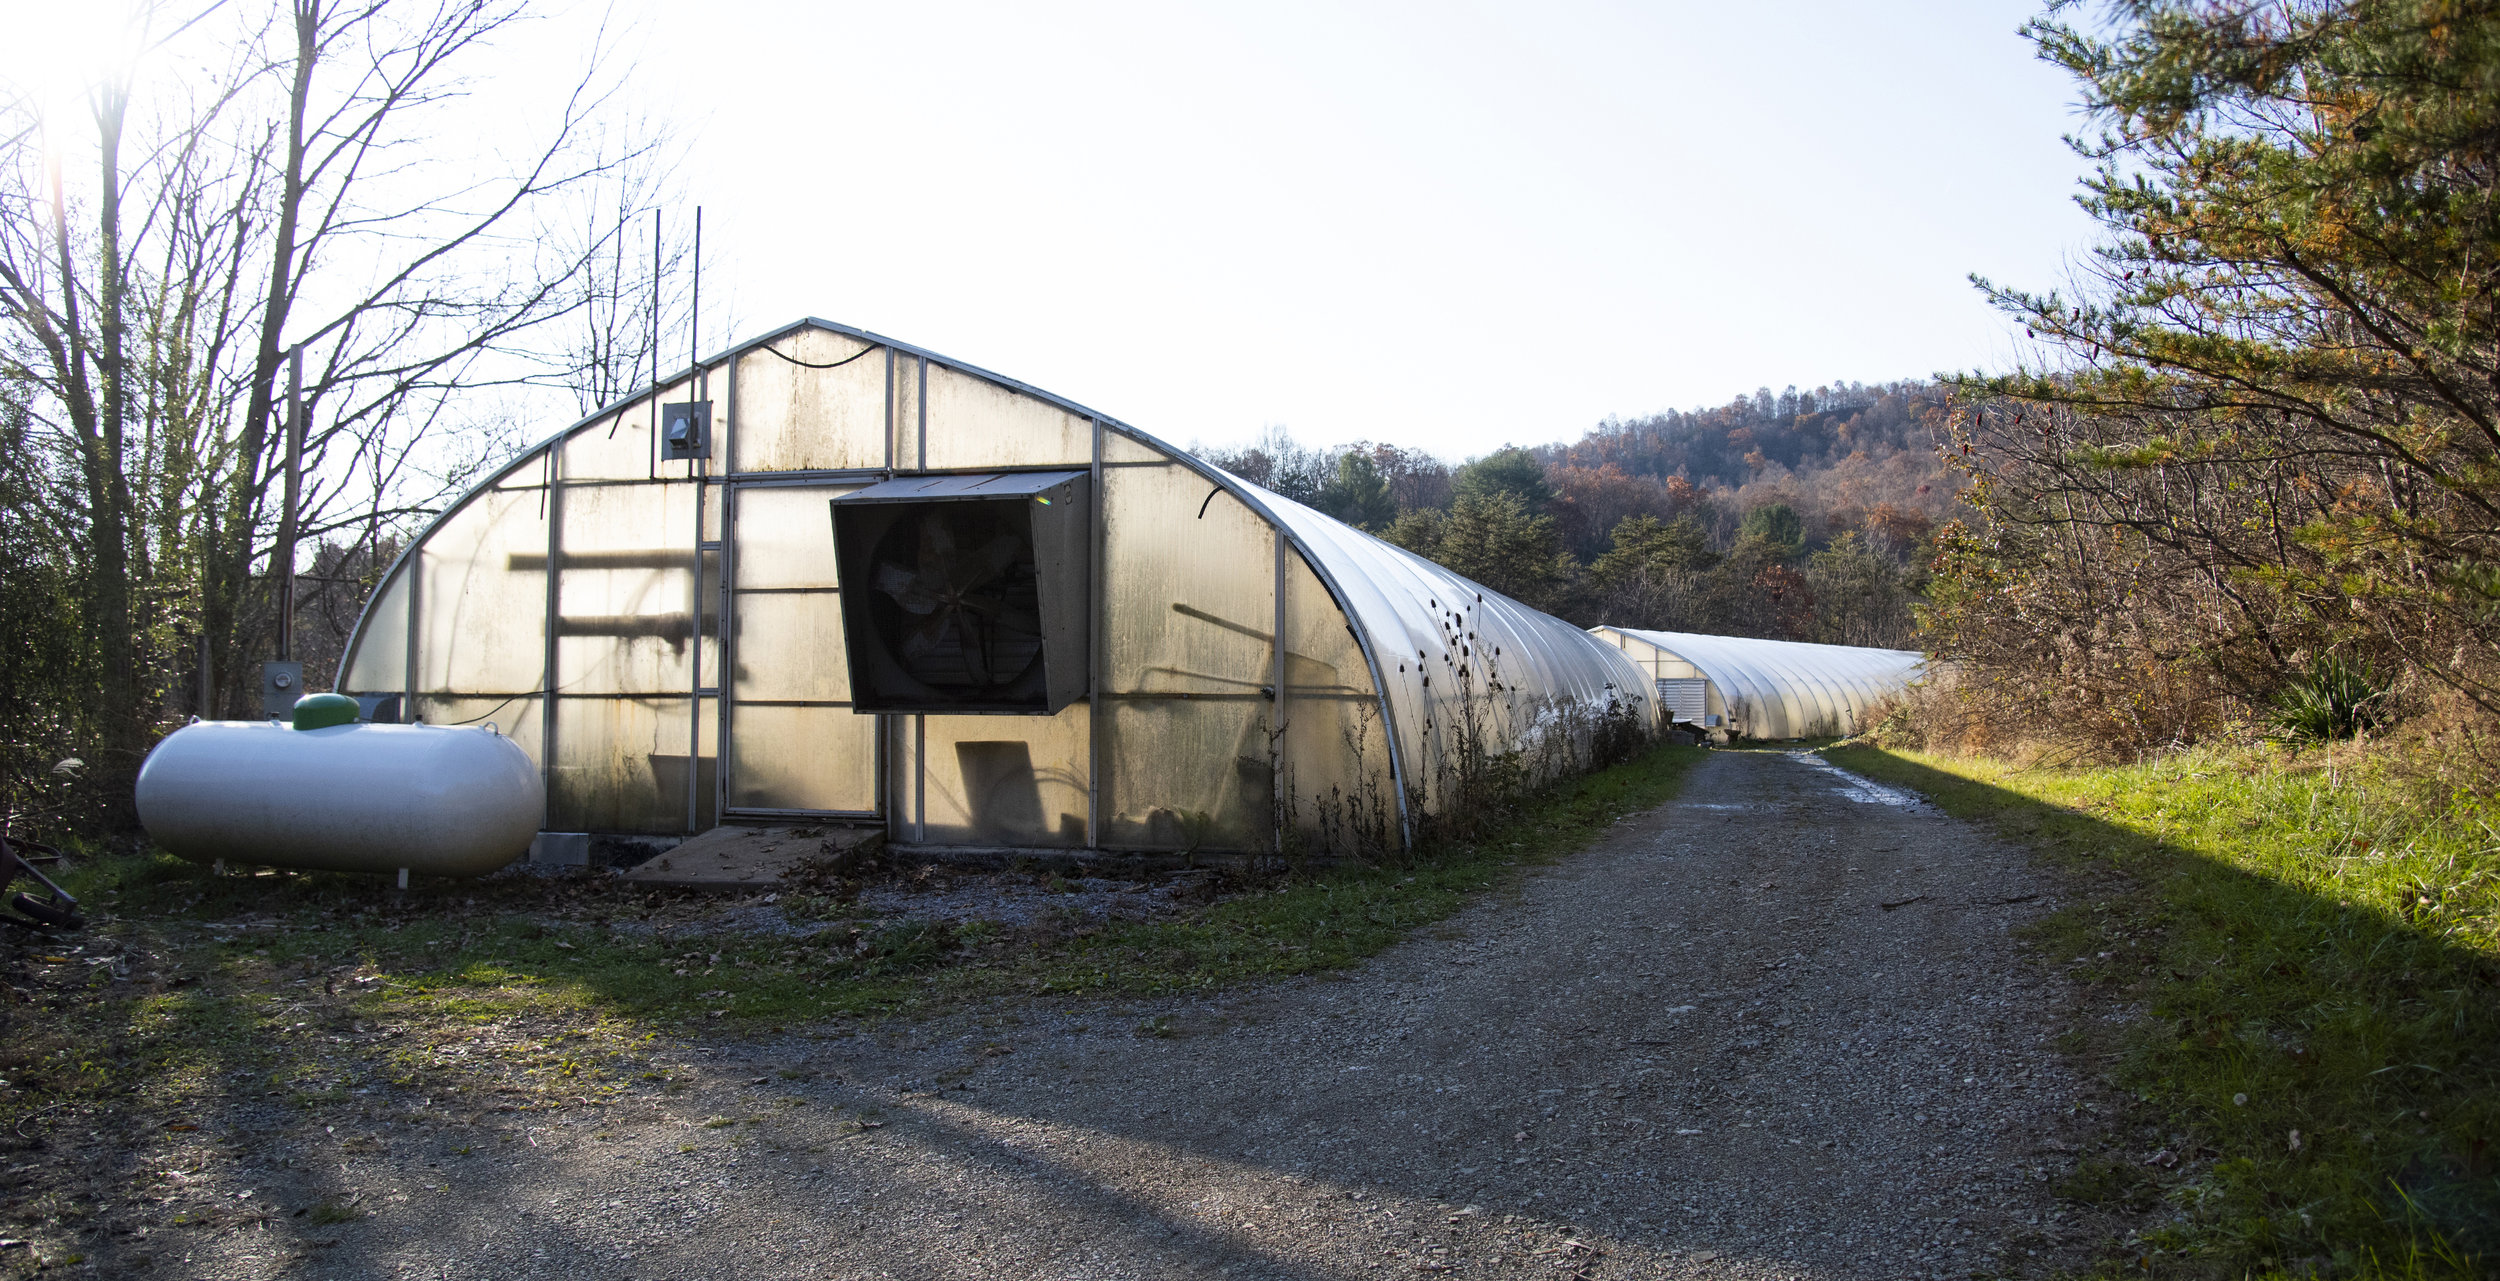  Two community greenhouses are tucked away in Julian Woods. The first greenhouse is used for wastewater treatment, and the second greenhouse is used by Deb Fisher for growing dahlias that she sells at the Downtown State College Farmers Market. 